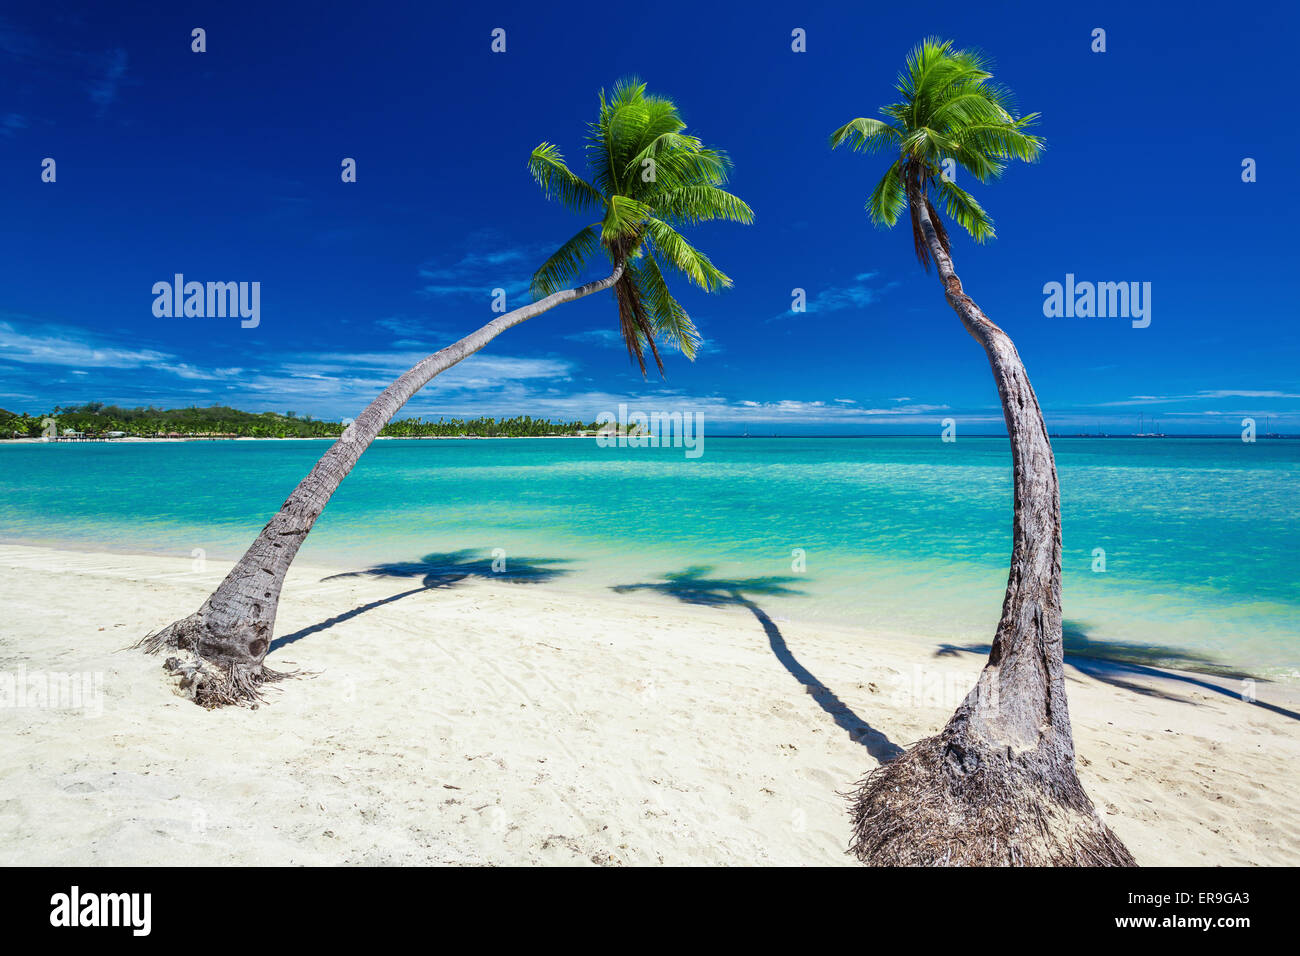 Palm trees hanging over stunning lagoon with blue sky in Fiji Stock Photo